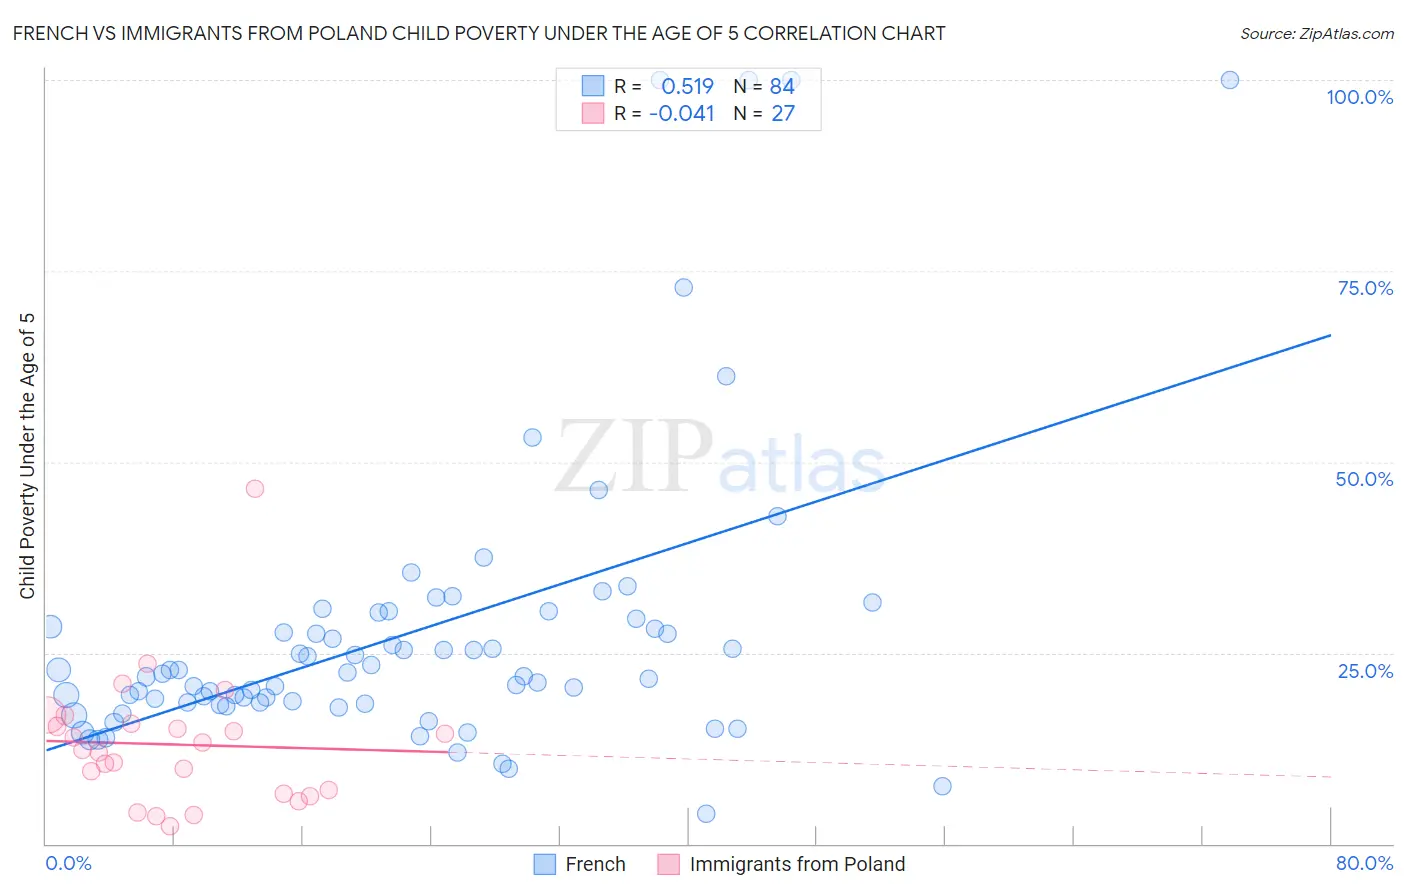 French vs Immigrants from Poland Child Poverty Under the Age of 5